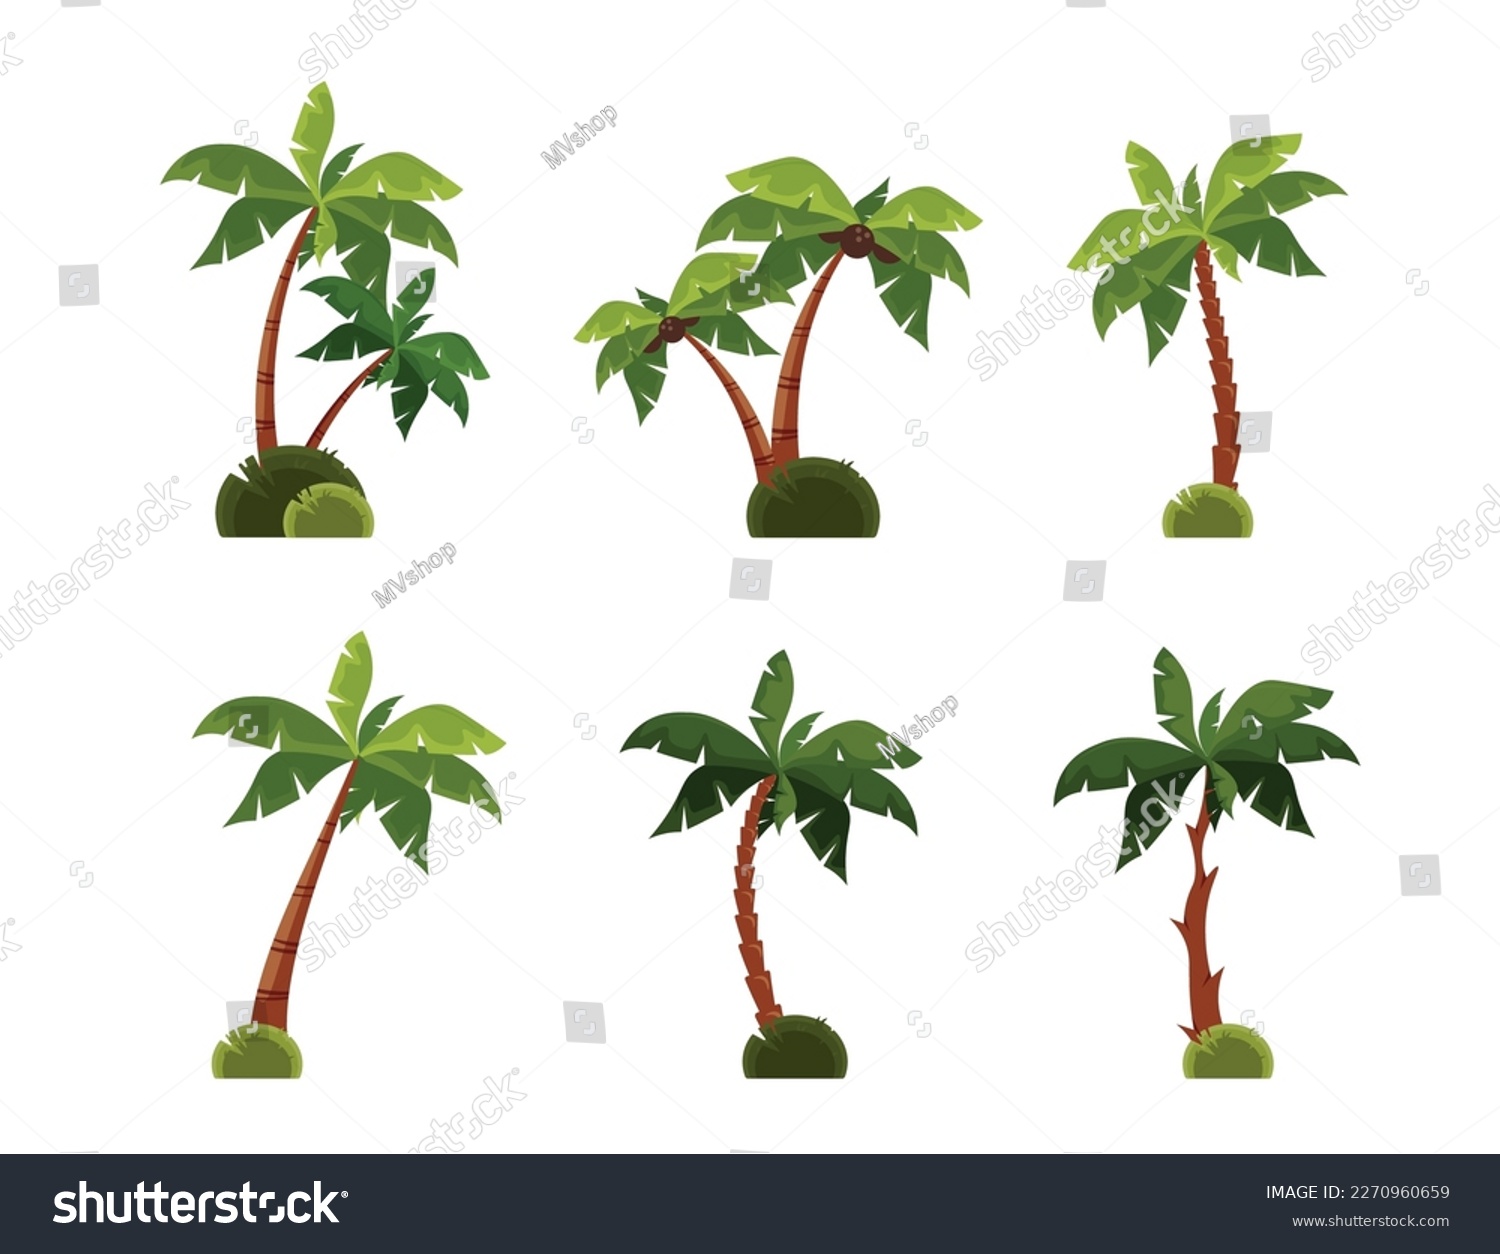 SVG of Set of different palm trees in cartoon style. Vector illustration of beautiful green palm trees with coconuts isolated on white background. Tropical coconut trees. svg